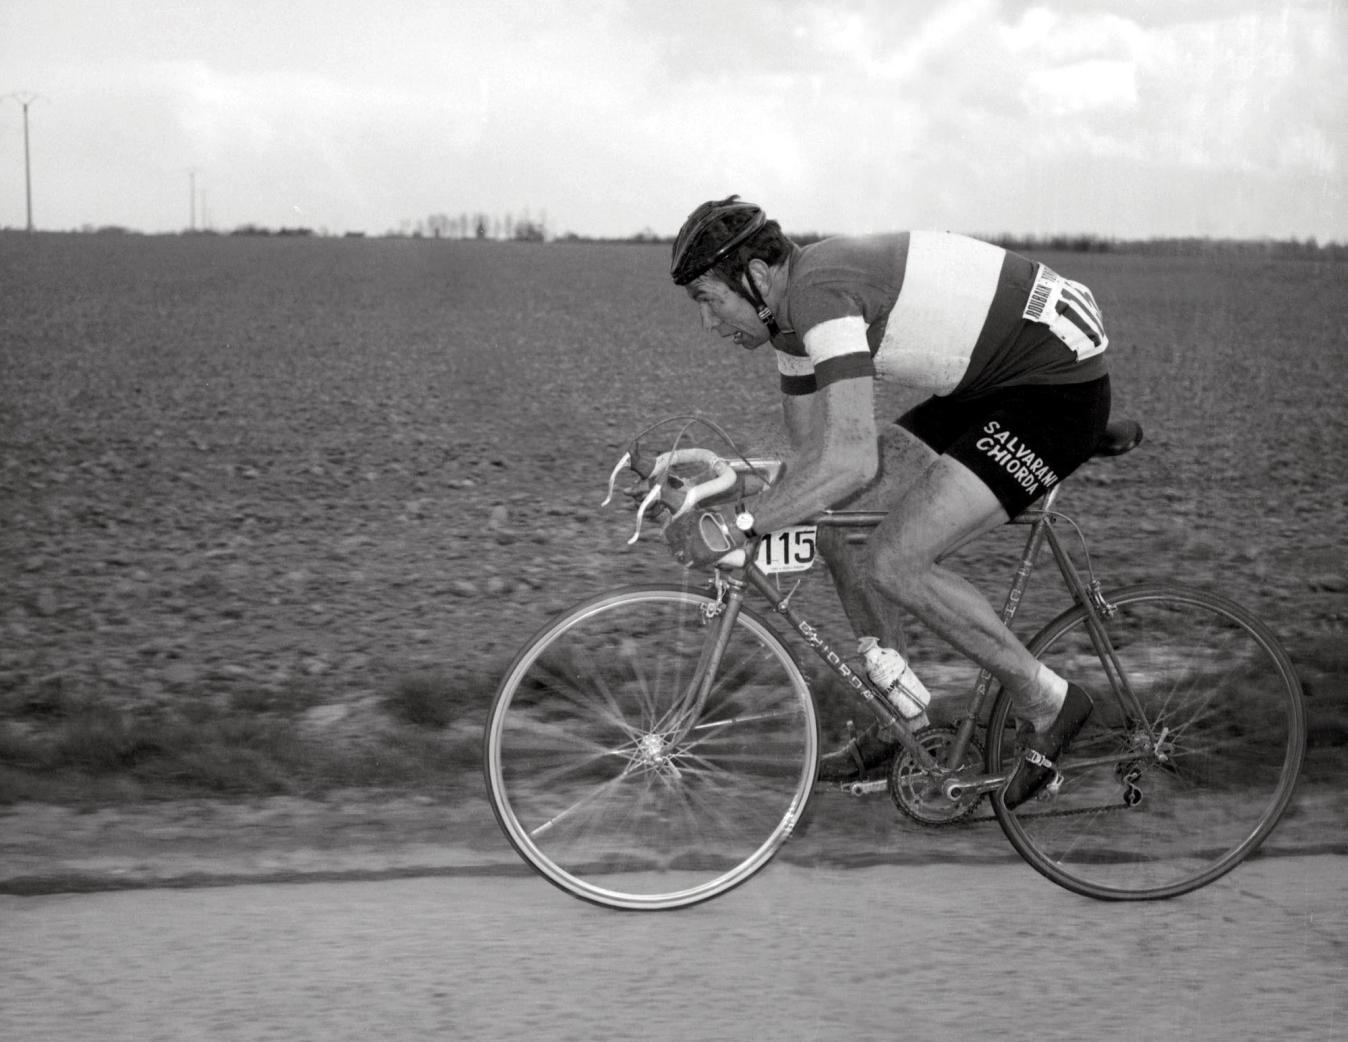 Winner of Paris-Roubaix, Felice Gimondi, riding the race three years after his victory